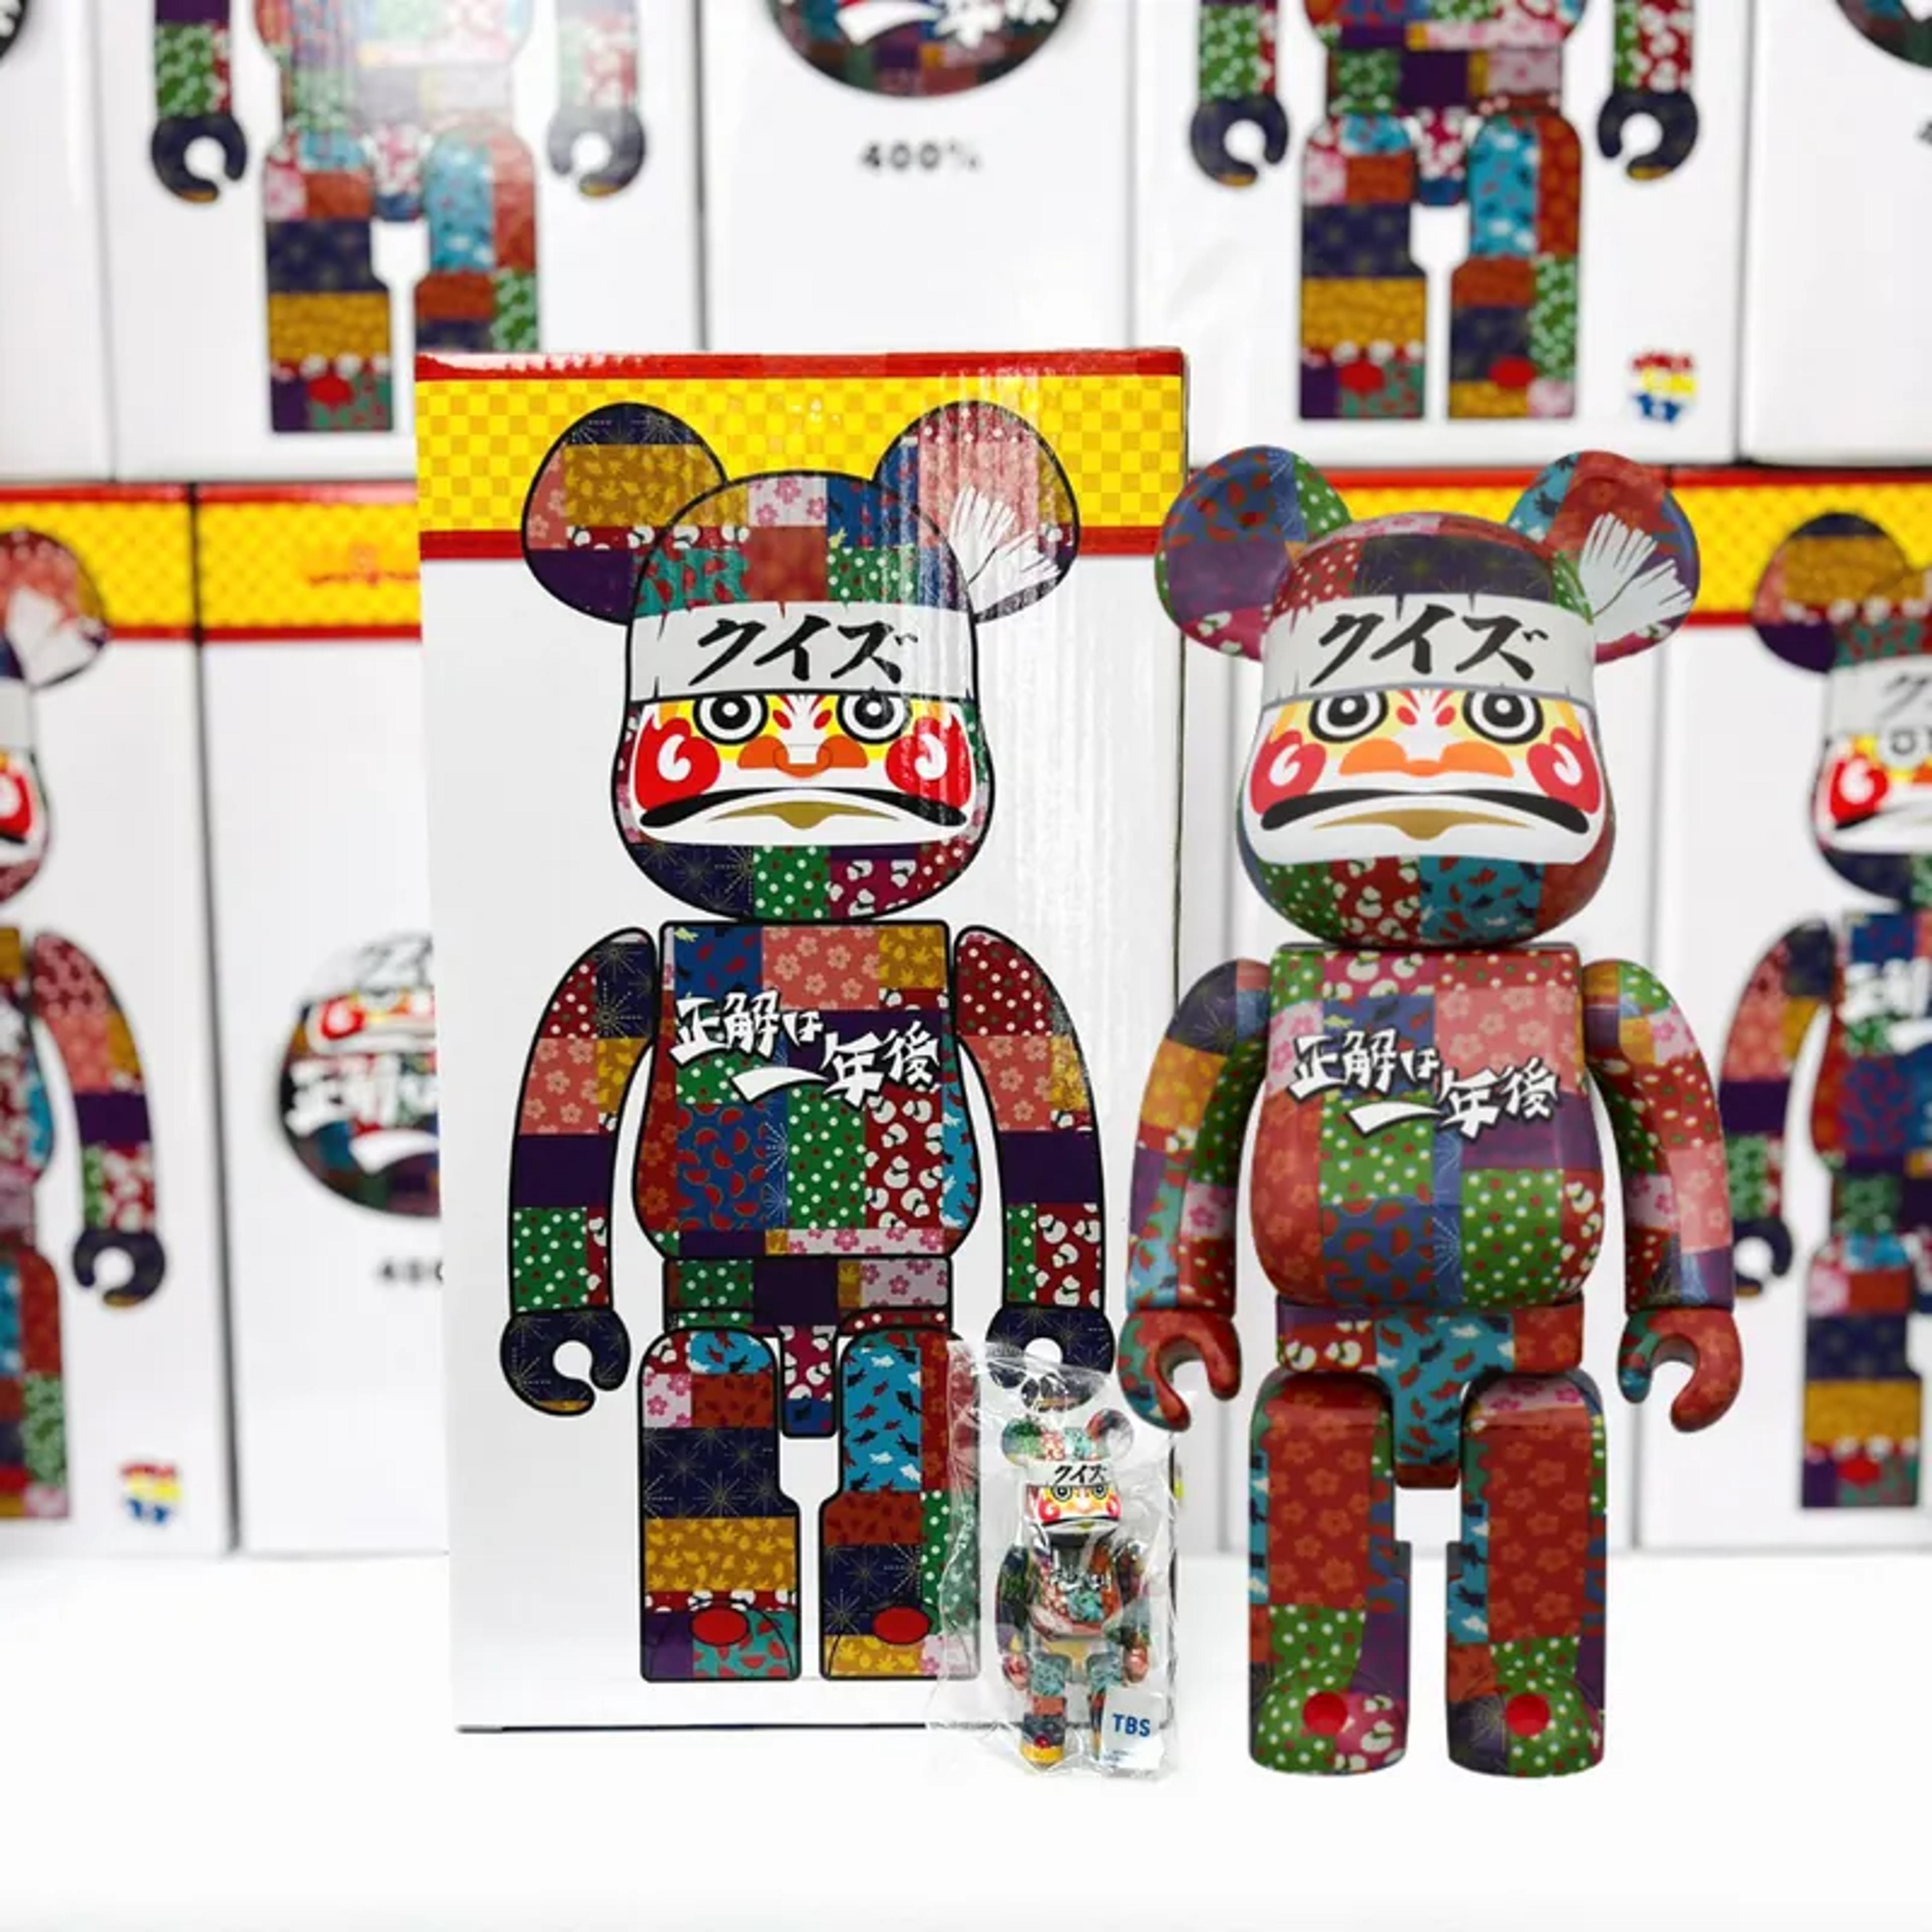 [Free shipping] BE@RBRICK 達磨 クイズ☆正解は一年後 Daruma Quiz☆Correct answer will be revealed in one year